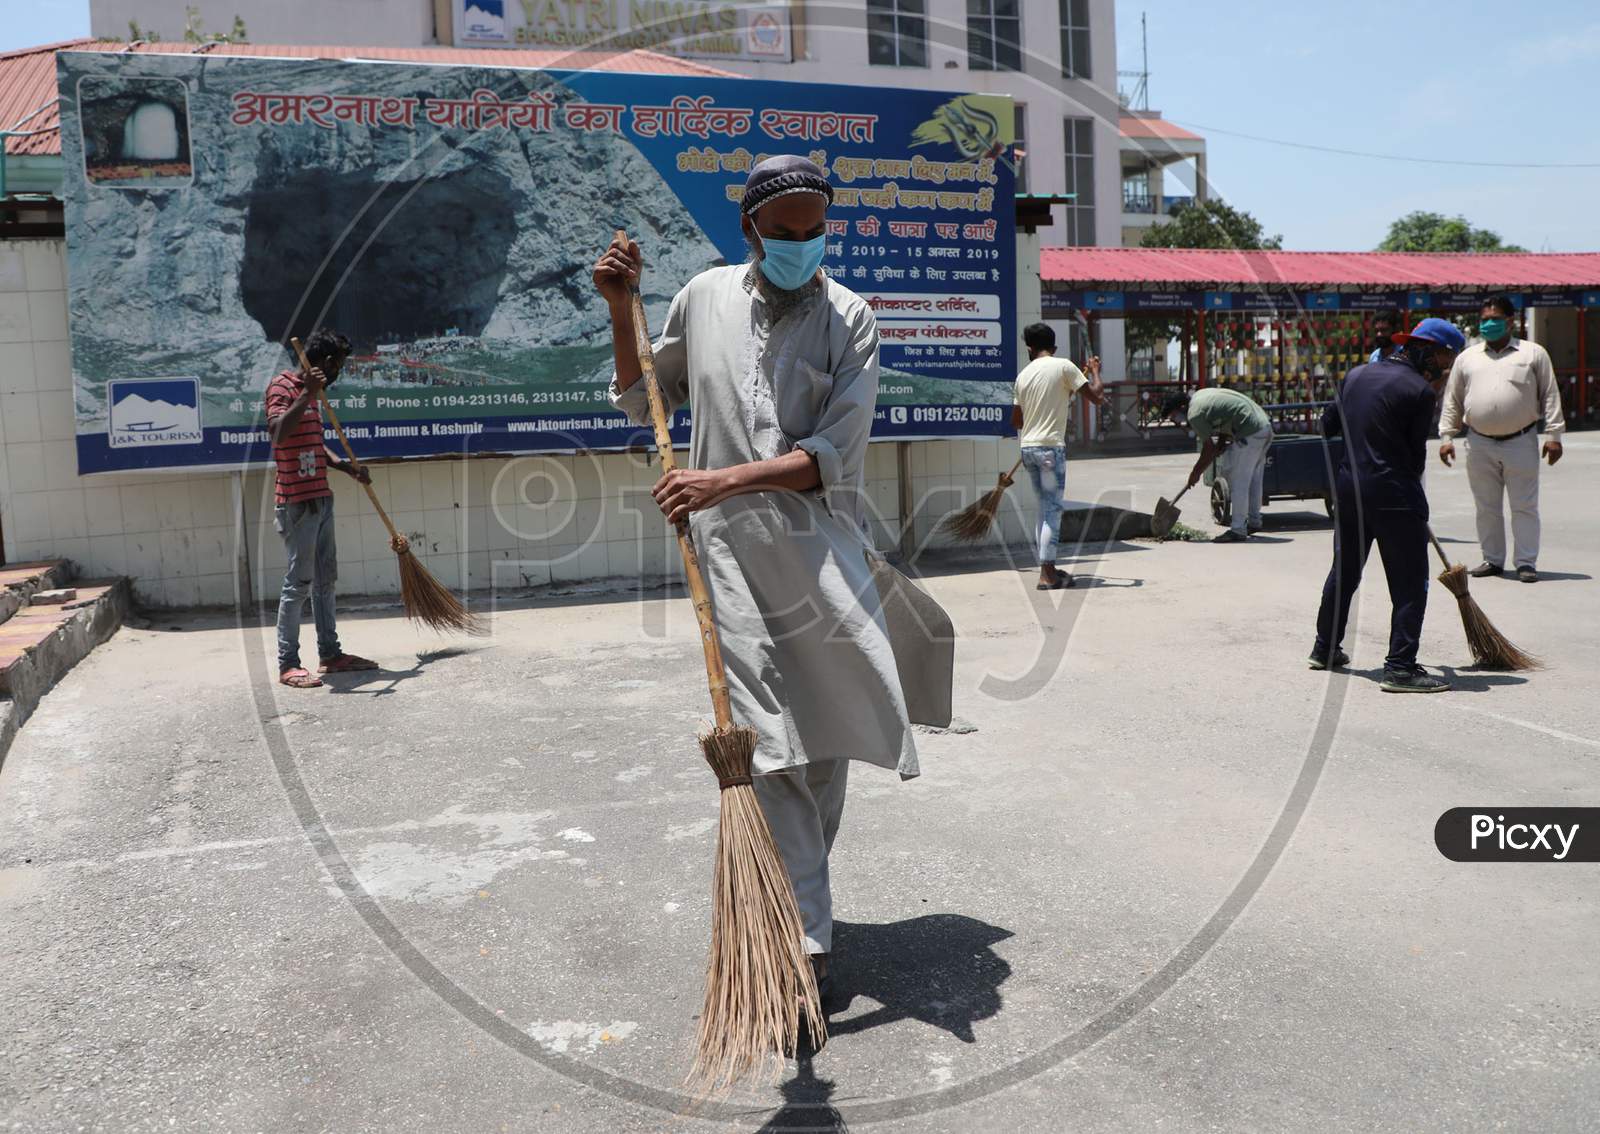 Workers clean the premises at the base camp of Amarnath Yatra in Jammu on July 05, 2020